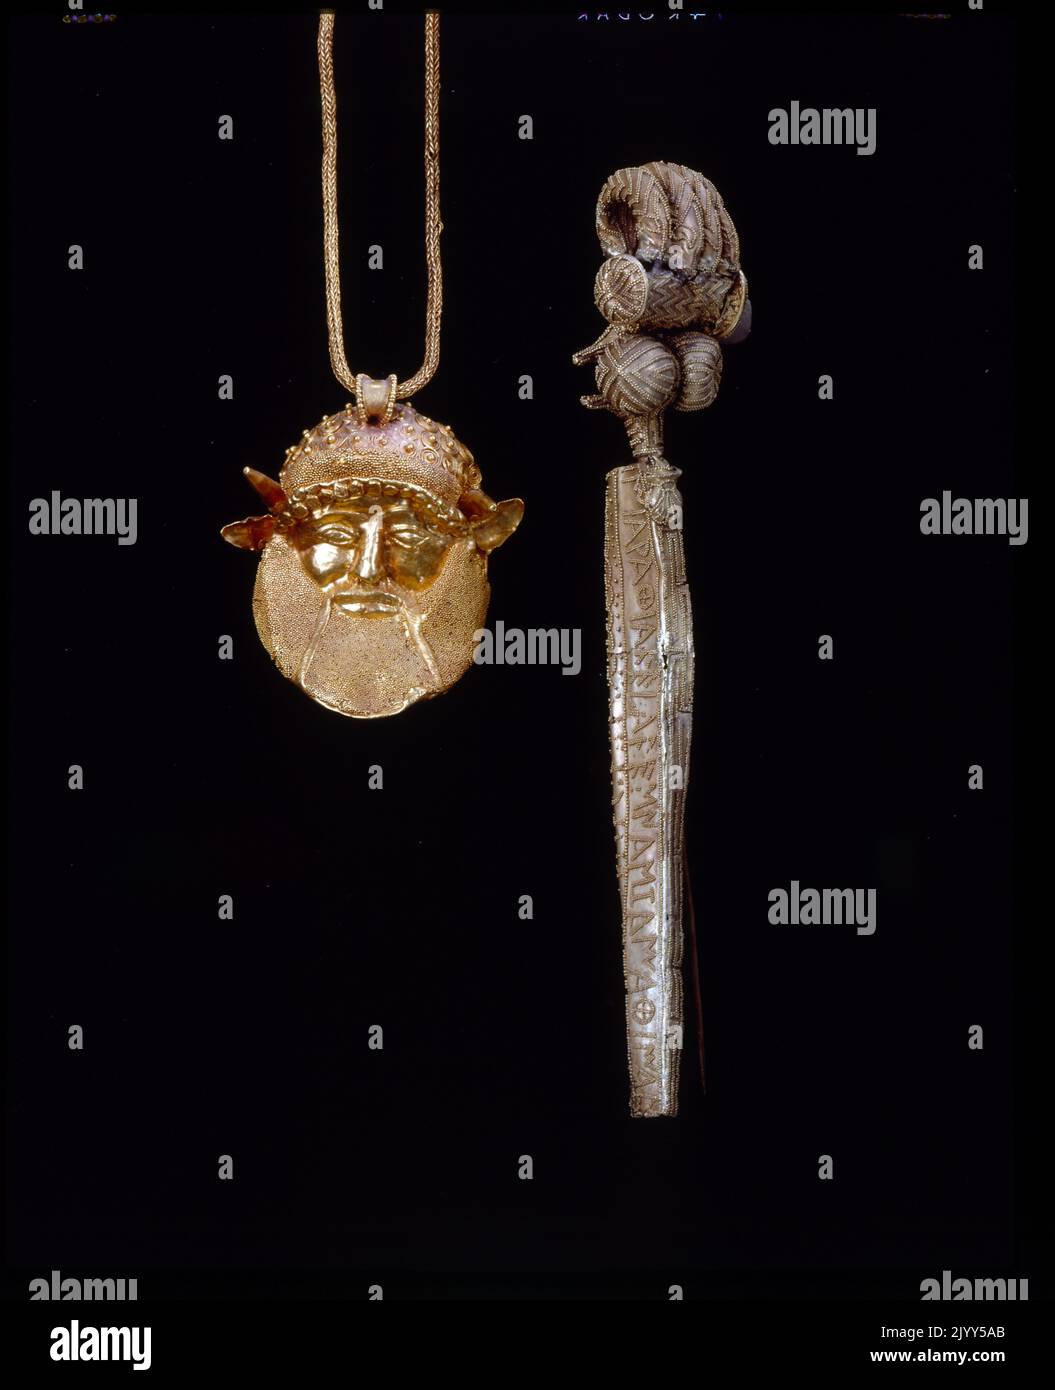 5th century BC Etruscan Gold work: pendant representing Achelous, the Greek River God (left) and a Serpentine fibula (right). The Serpentine bow fibula, known as the Chiusi fibula dates from the 9th-1st centuries BC. The Etruscan civilization is the modern name given to a powerful and wealthy civilization of ancient Italy in the area corresponding roughly to Tuscany, from 700 BC) until its assimilation into the Roman Republic, beginning in the late 4th century BC Stock Photo